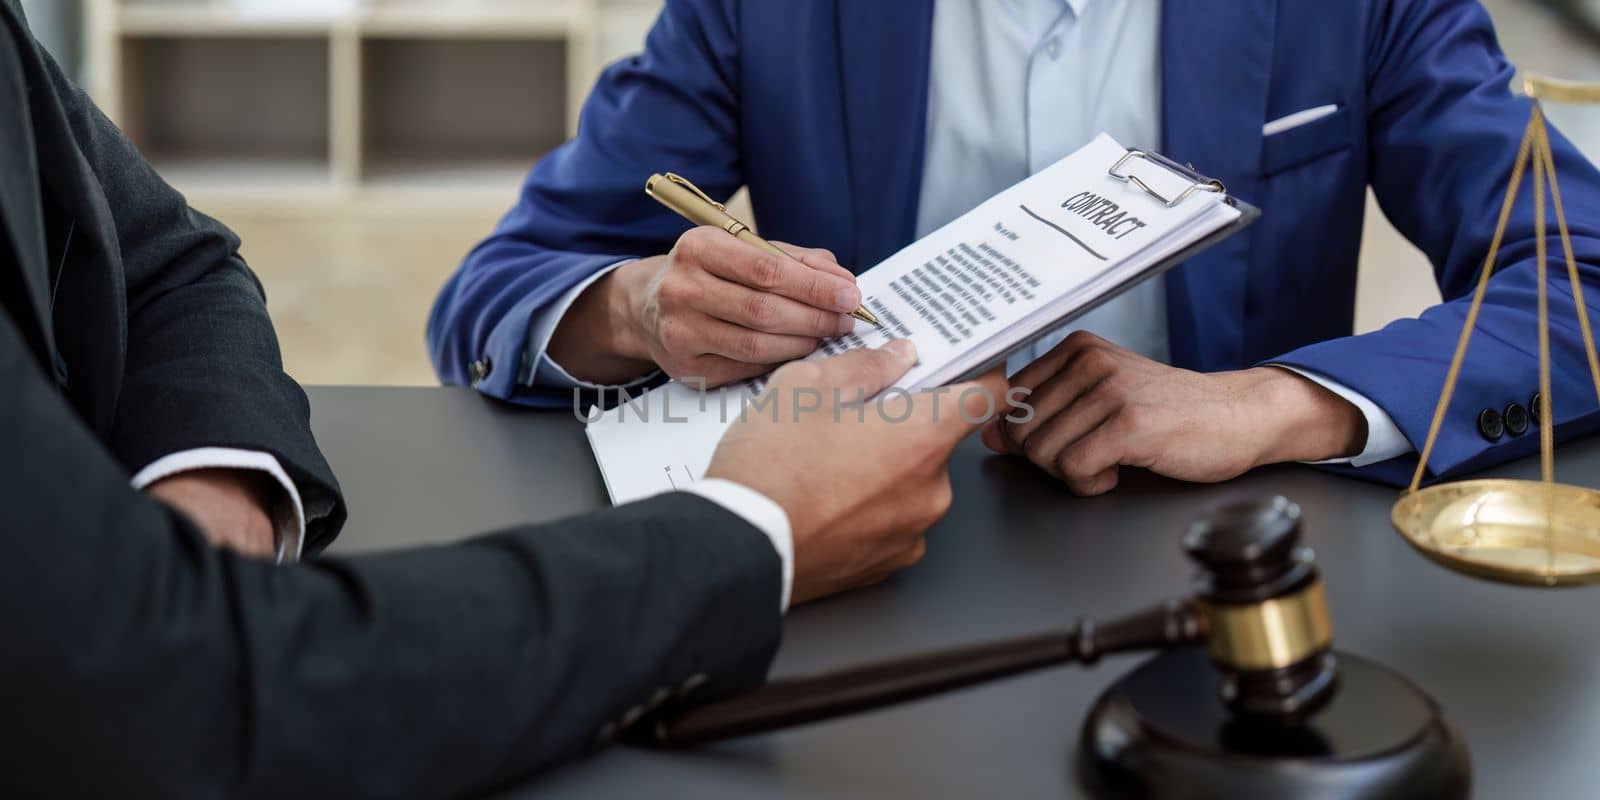 Business people and lawyers discussing contract papers with brass scale on wooden desk in office. Law, legal services, advice, Justice concept.